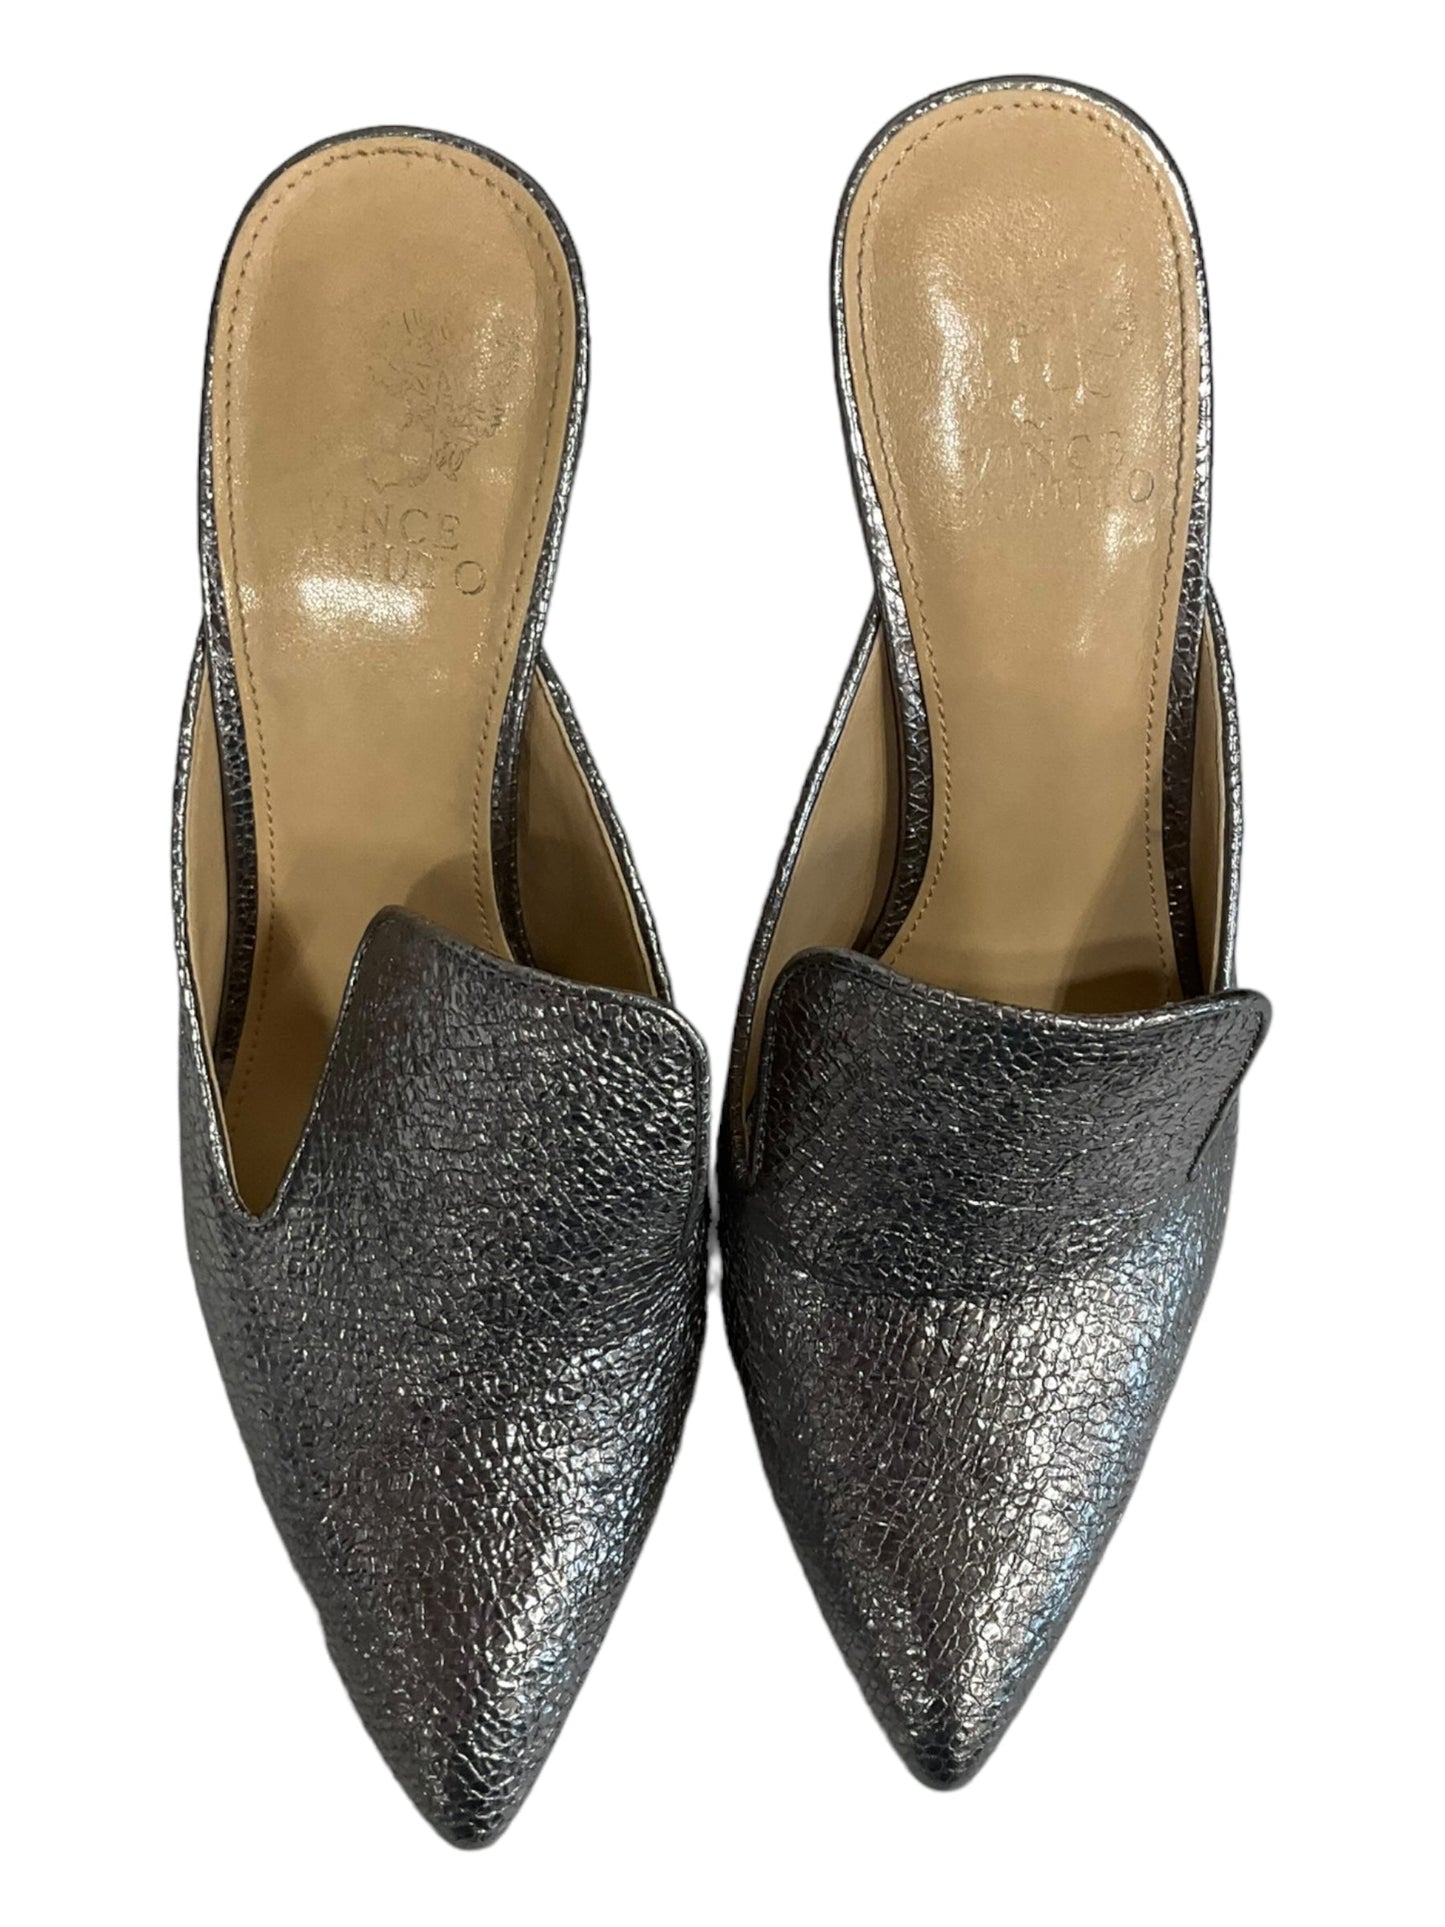 Grey Shoes Heels Stiletto Vince Camuto, Size 9.5